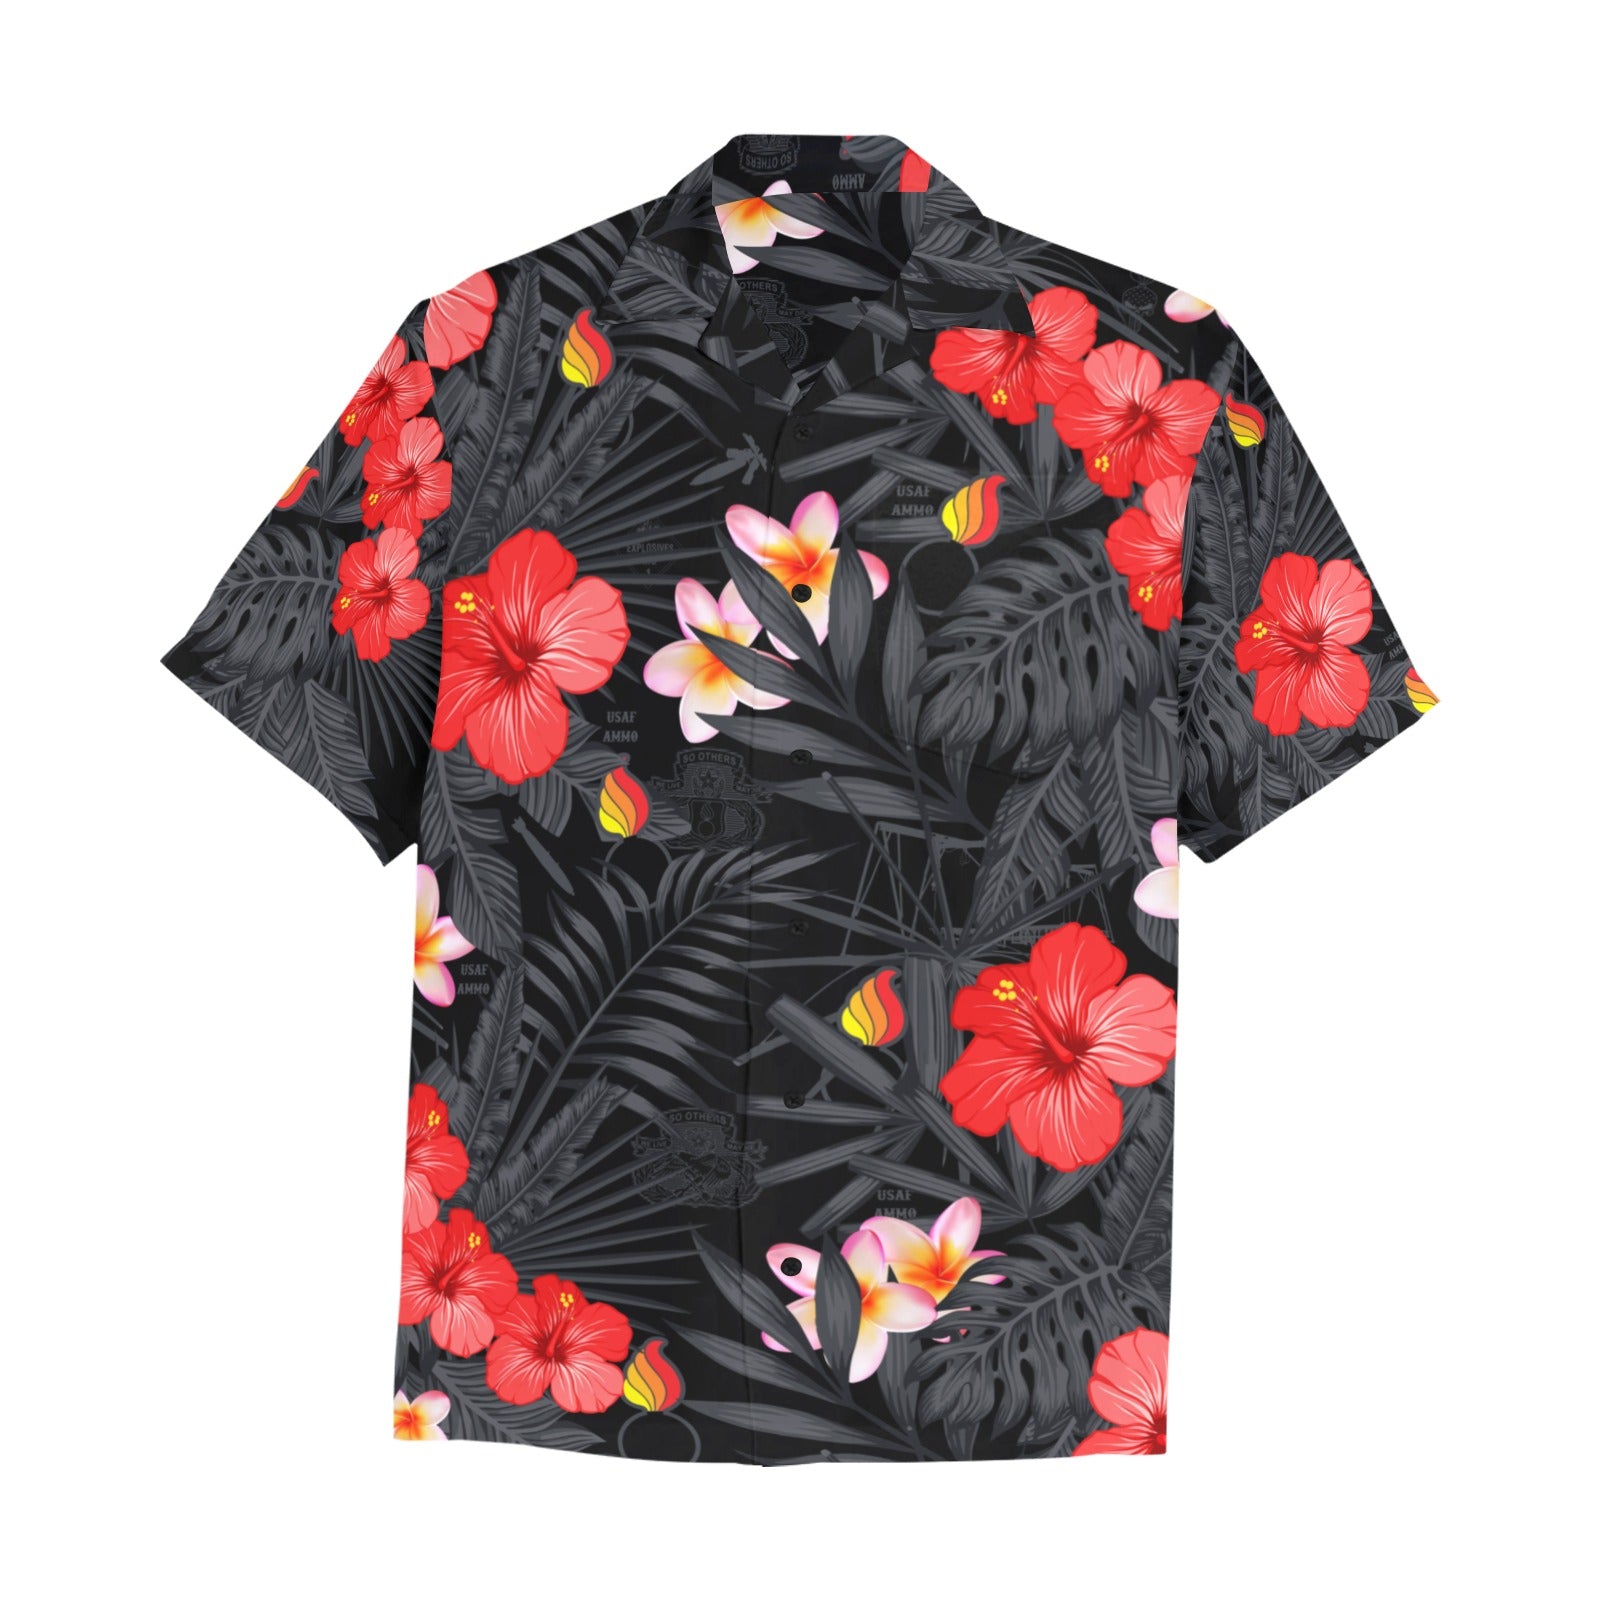 AMMO Hawaiian Shirt Green with White Hibiscus Flowers Pisspots and